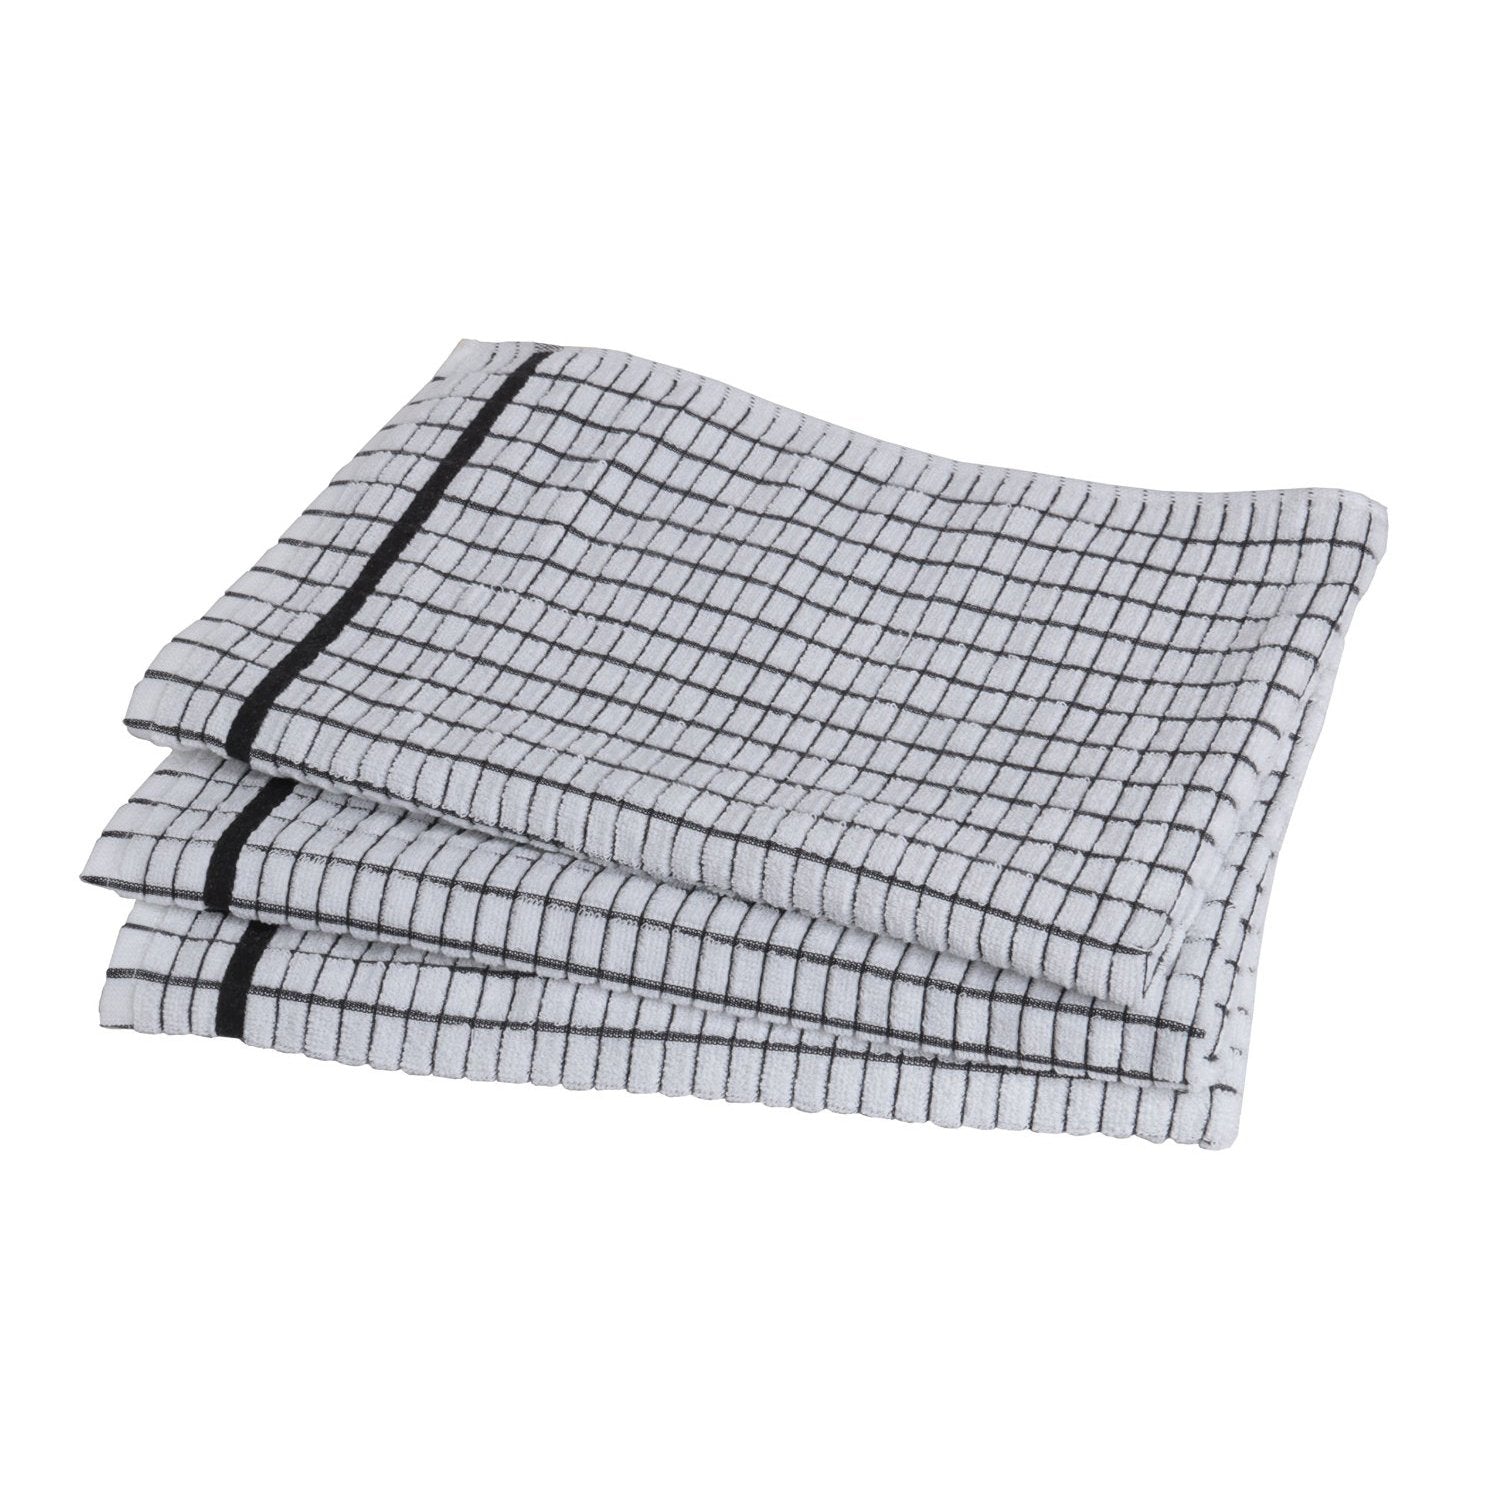 Cotton Dish Towels, checkered towel